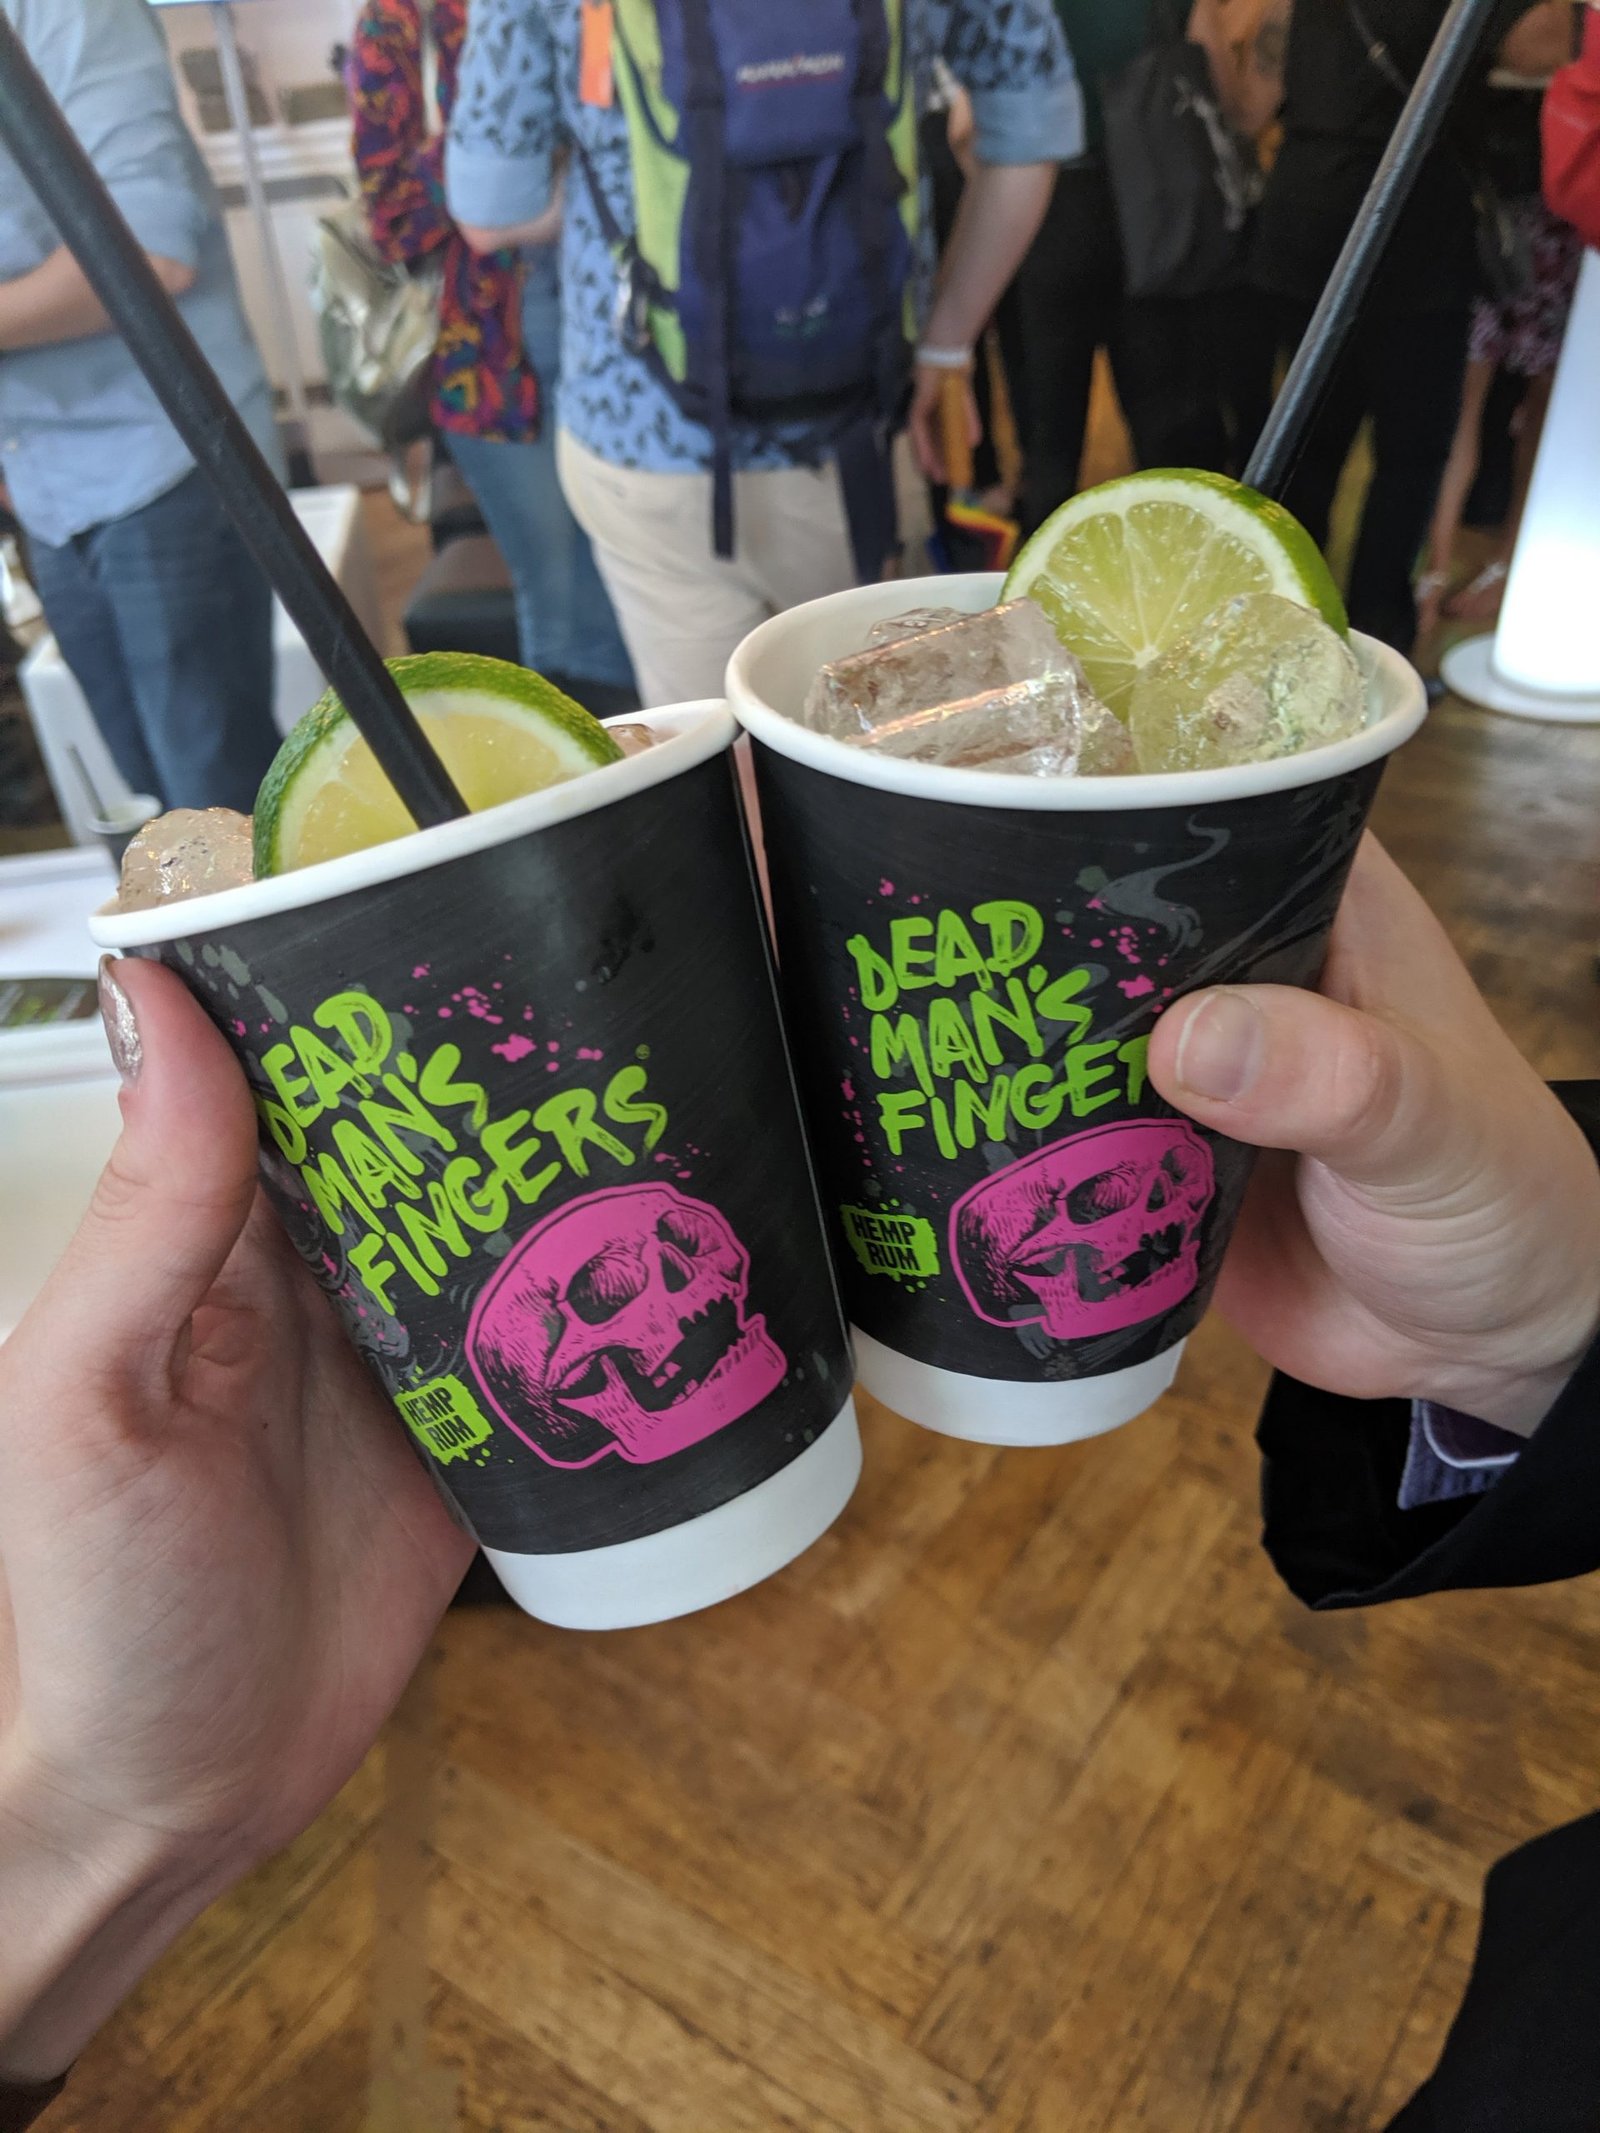 Dead Man’s Fingers Hemp Rum launches in style at House of Hemp